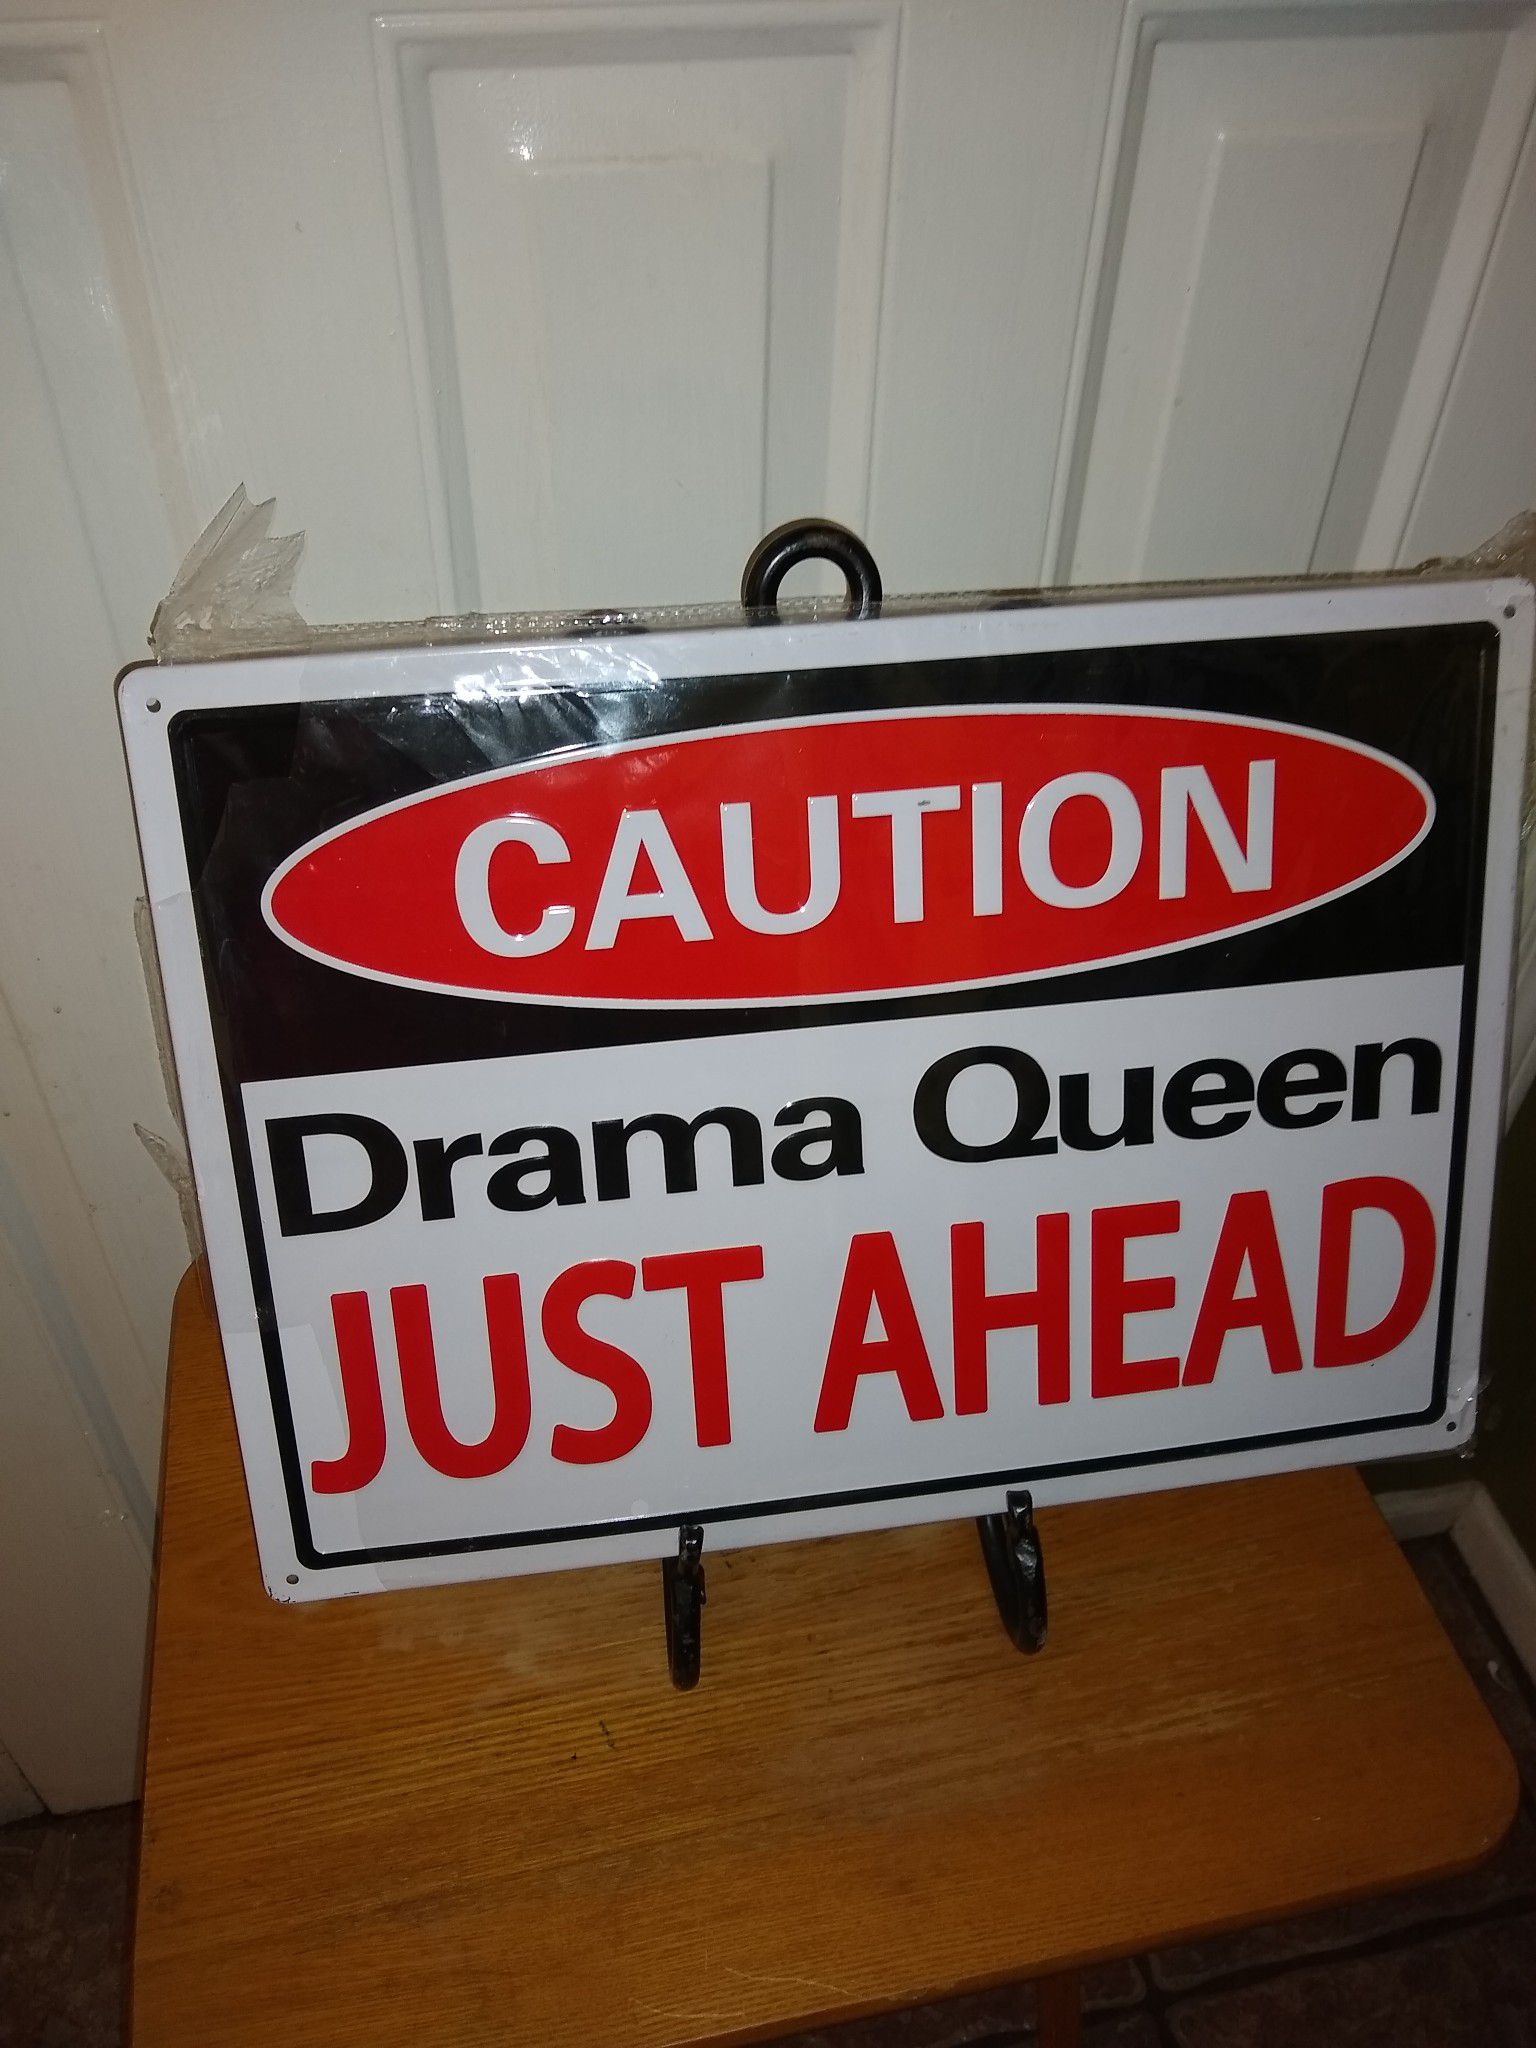 Caaution drama queen just ahead metal sign